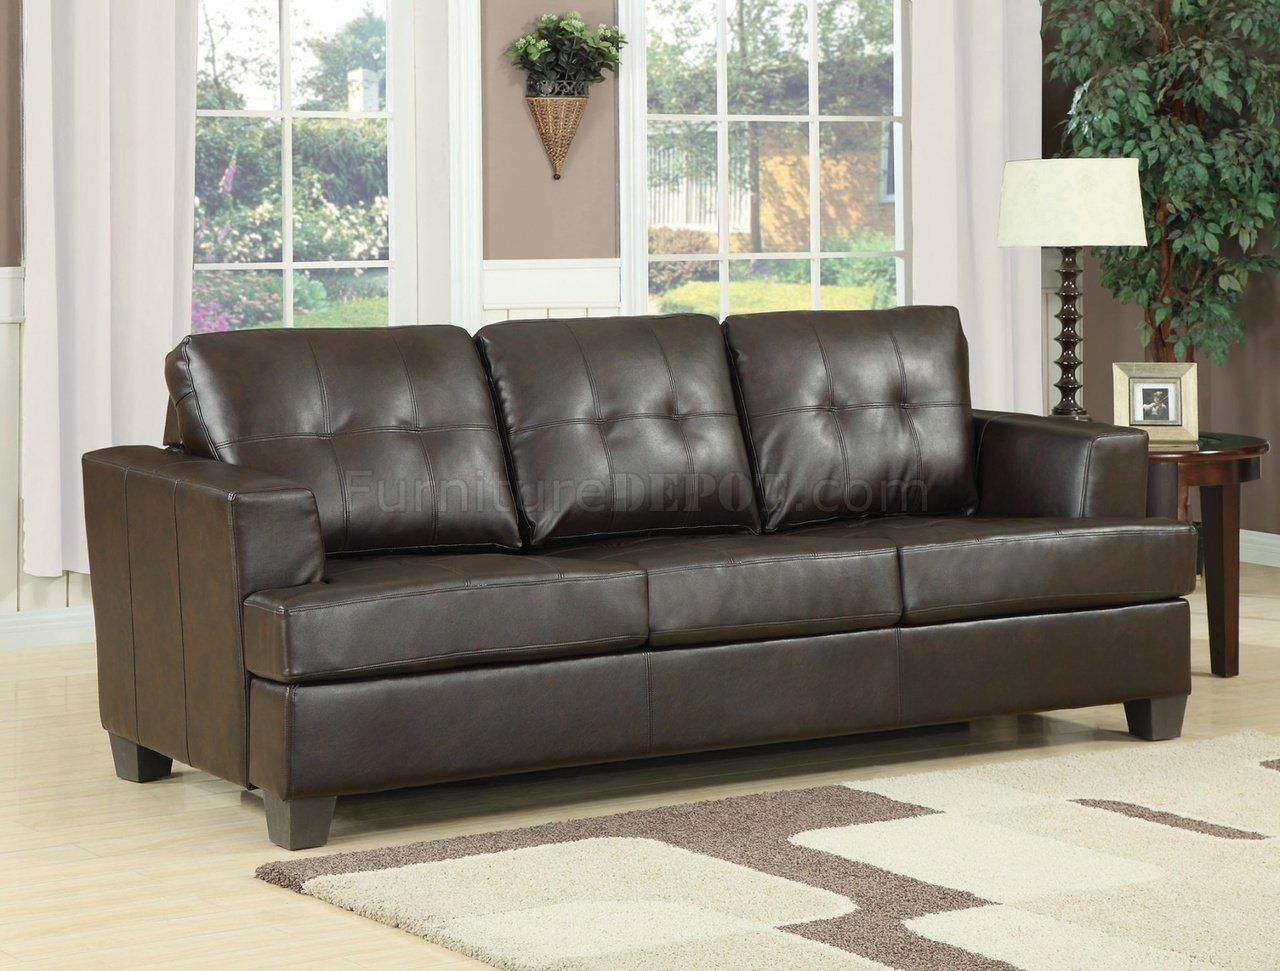 Brown Bonded Leather Modern Sofa w/Queen Size Sleeper